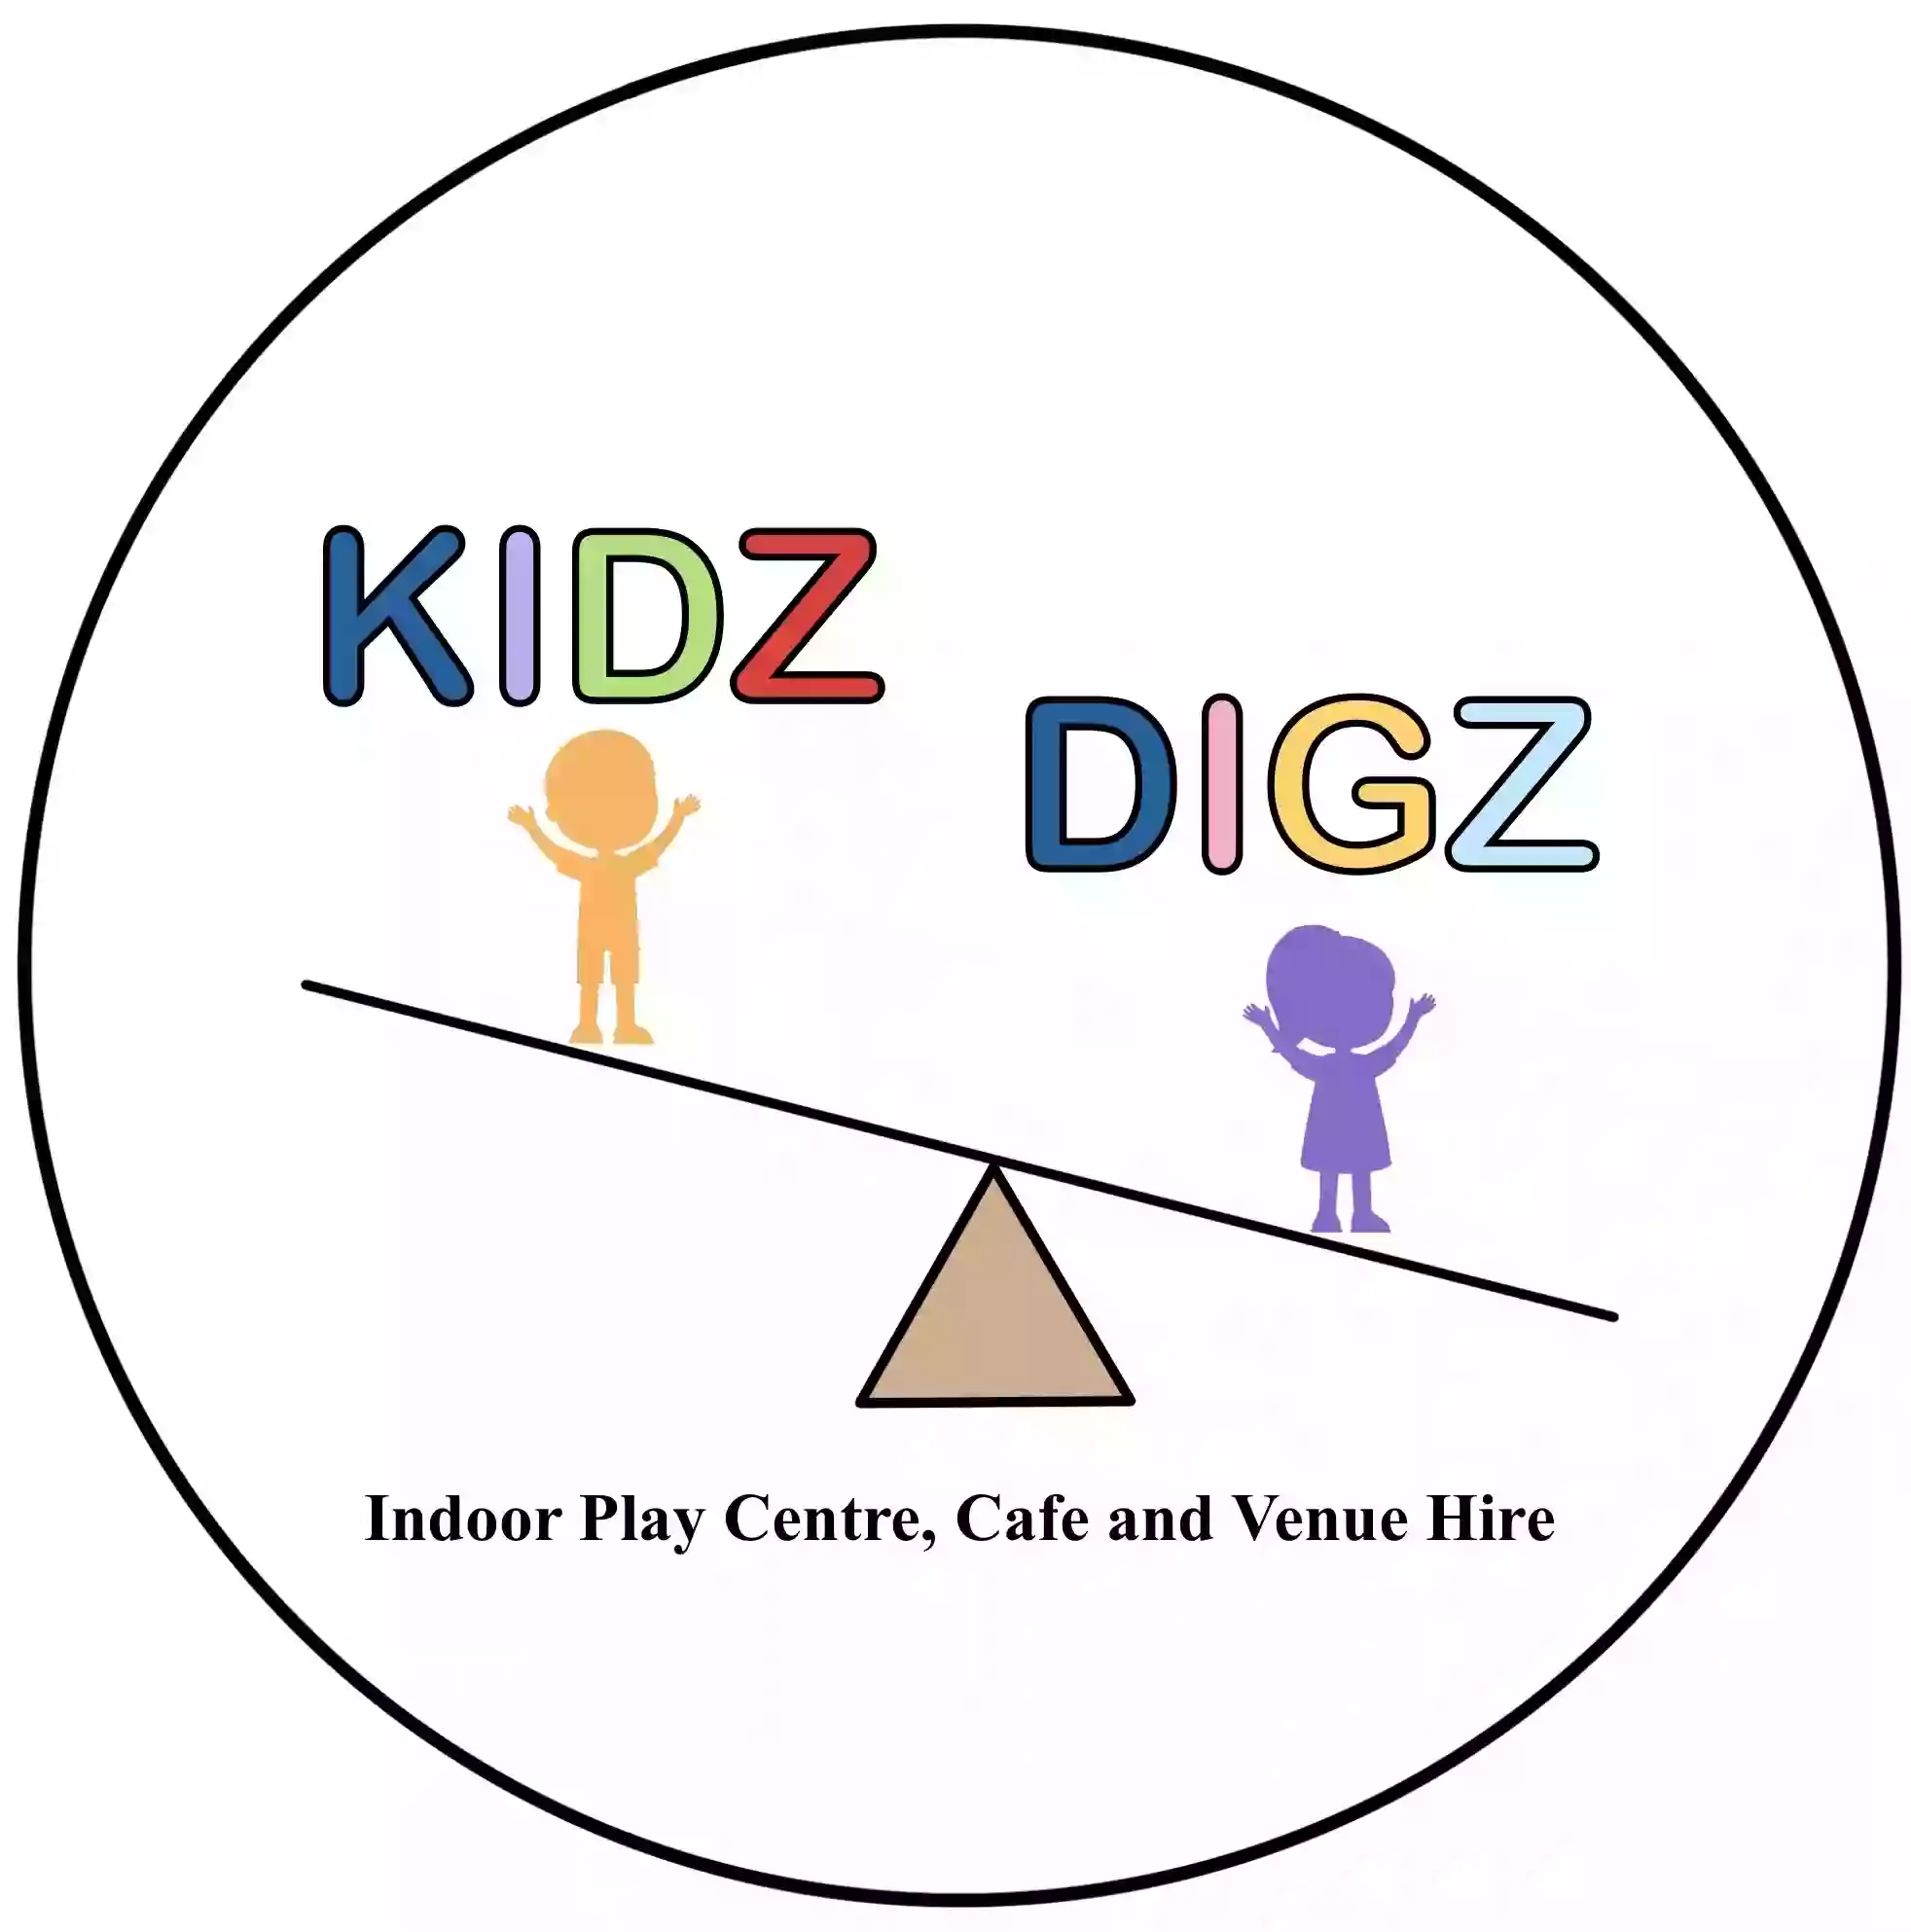 Kidz Digz Indoor Play Centre, Cafe and Venue Hire